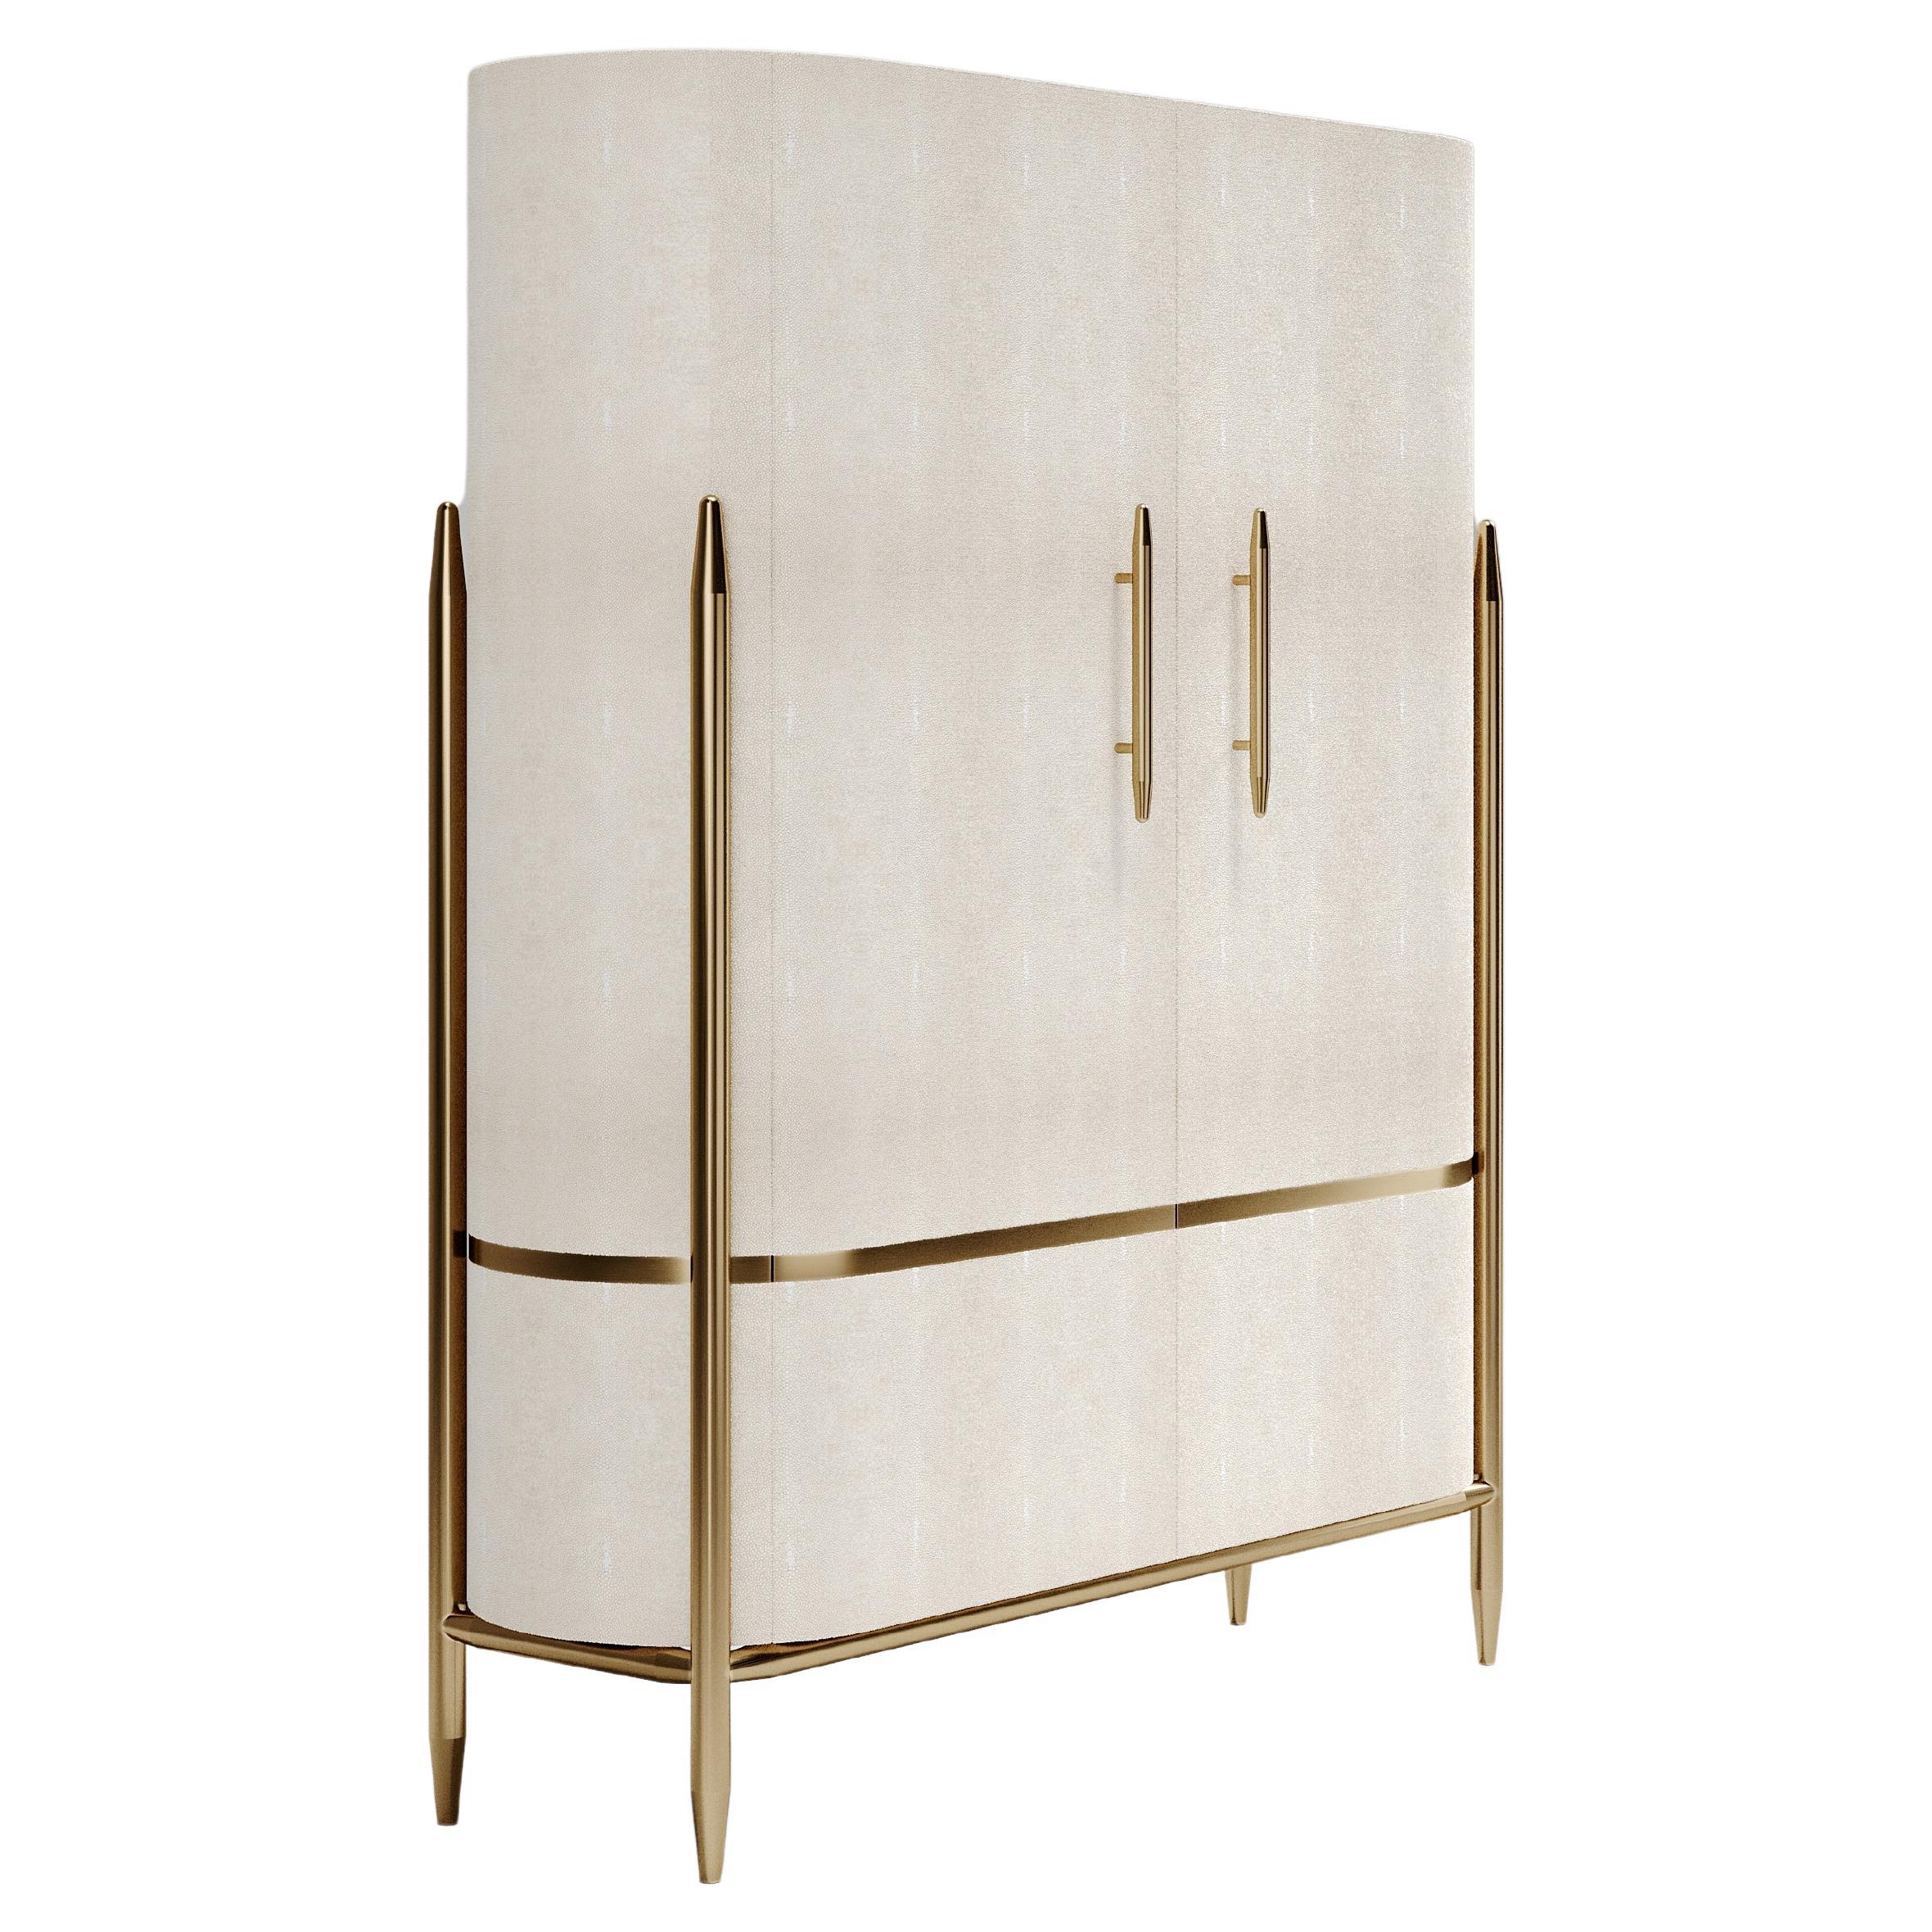 Shagreen Cabinet with Brass Accents by Kifu Paris